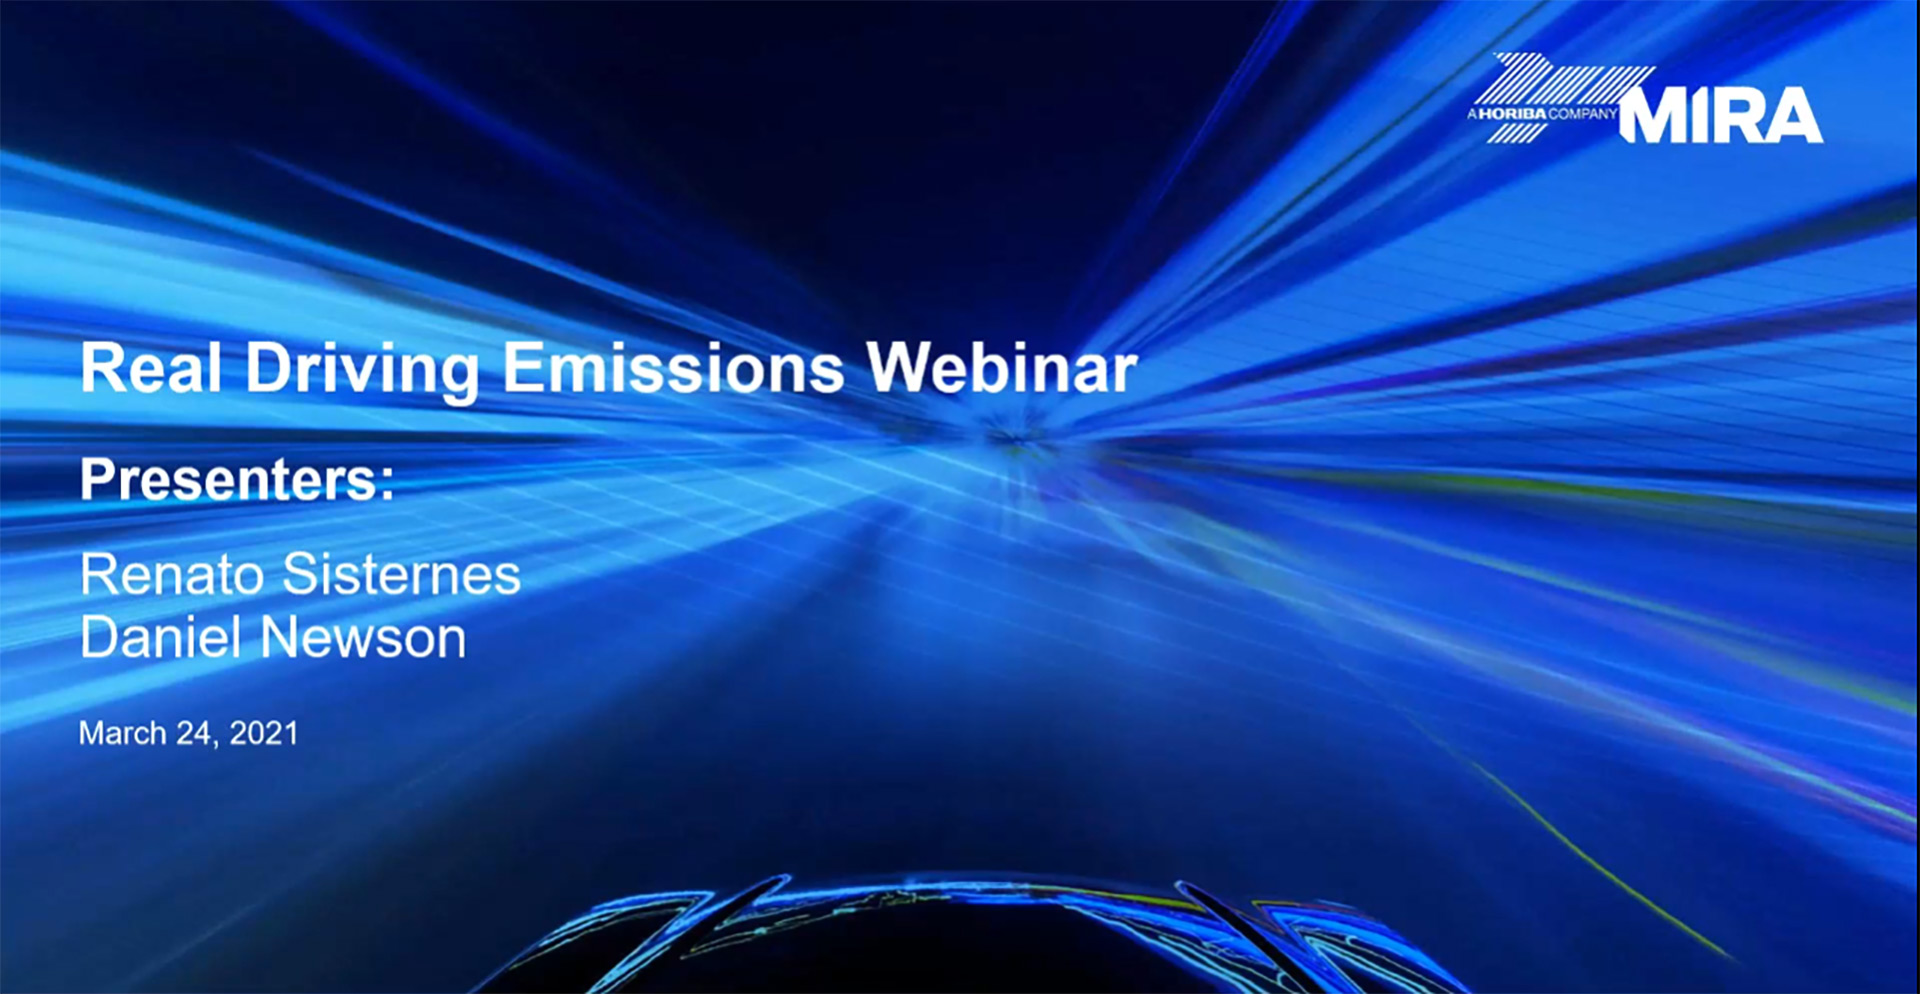 Solutions and Capabilities for Real Driving Emissions RDE Compliance